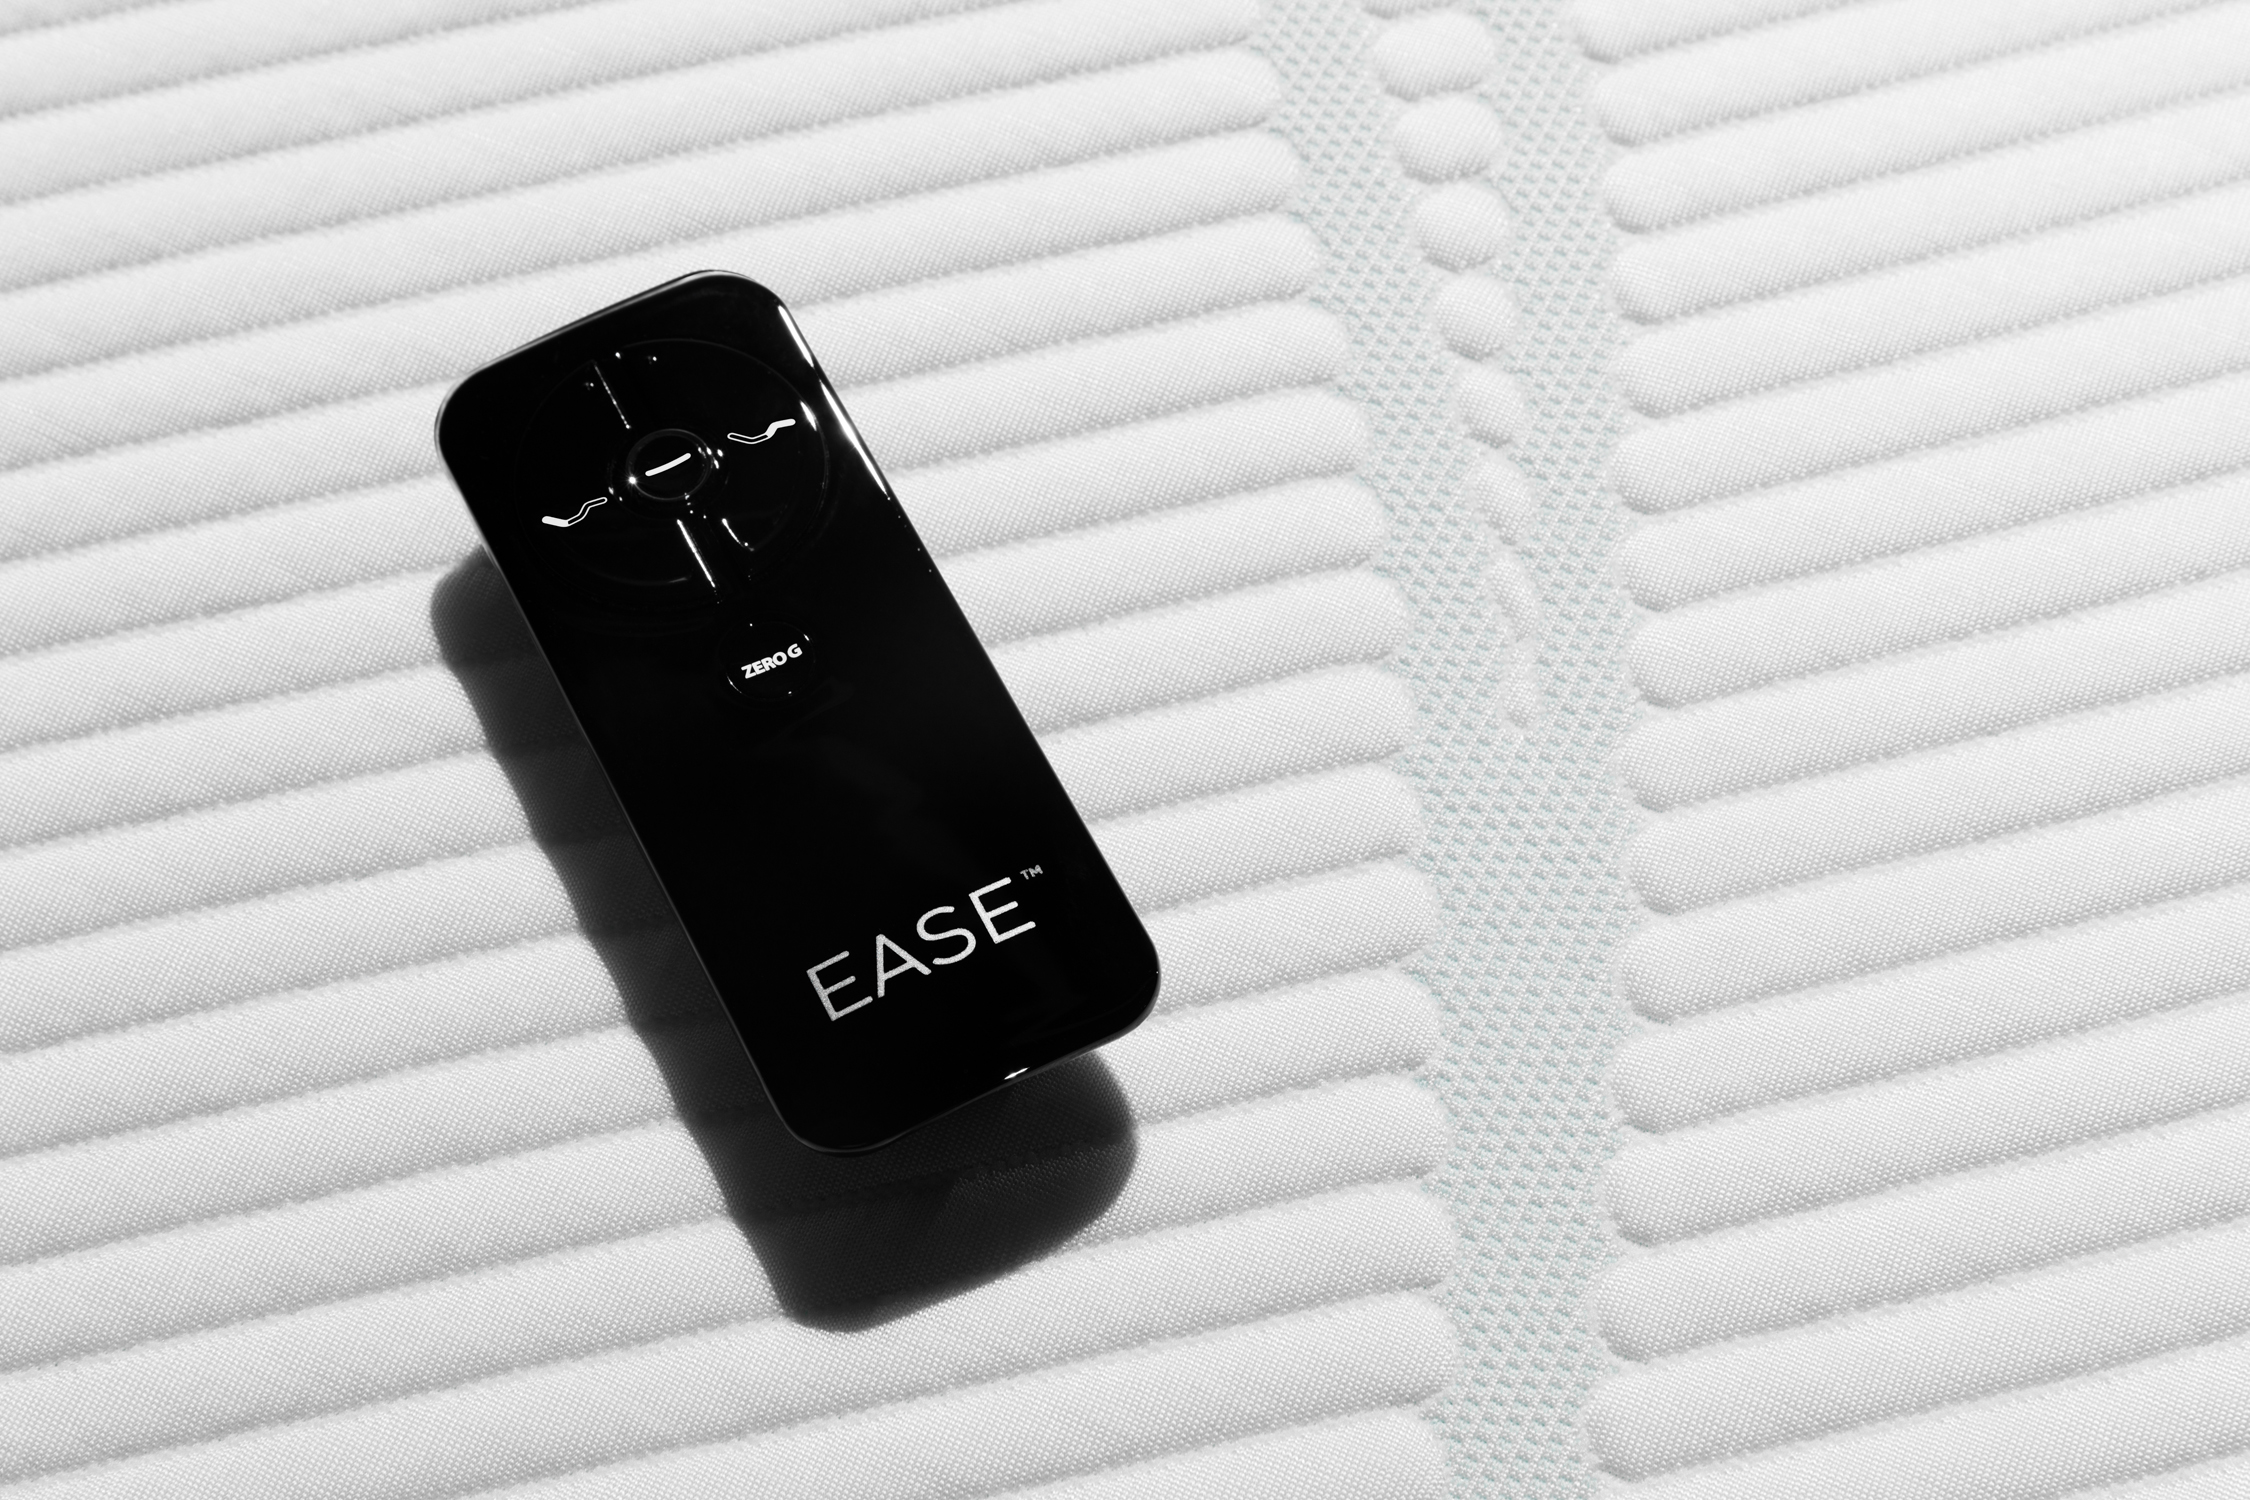 Details about   NEW Ease 2.0/3.0 Replacement Remotes Tempurpedic/ Sealy Adjustable Beds/Bases 